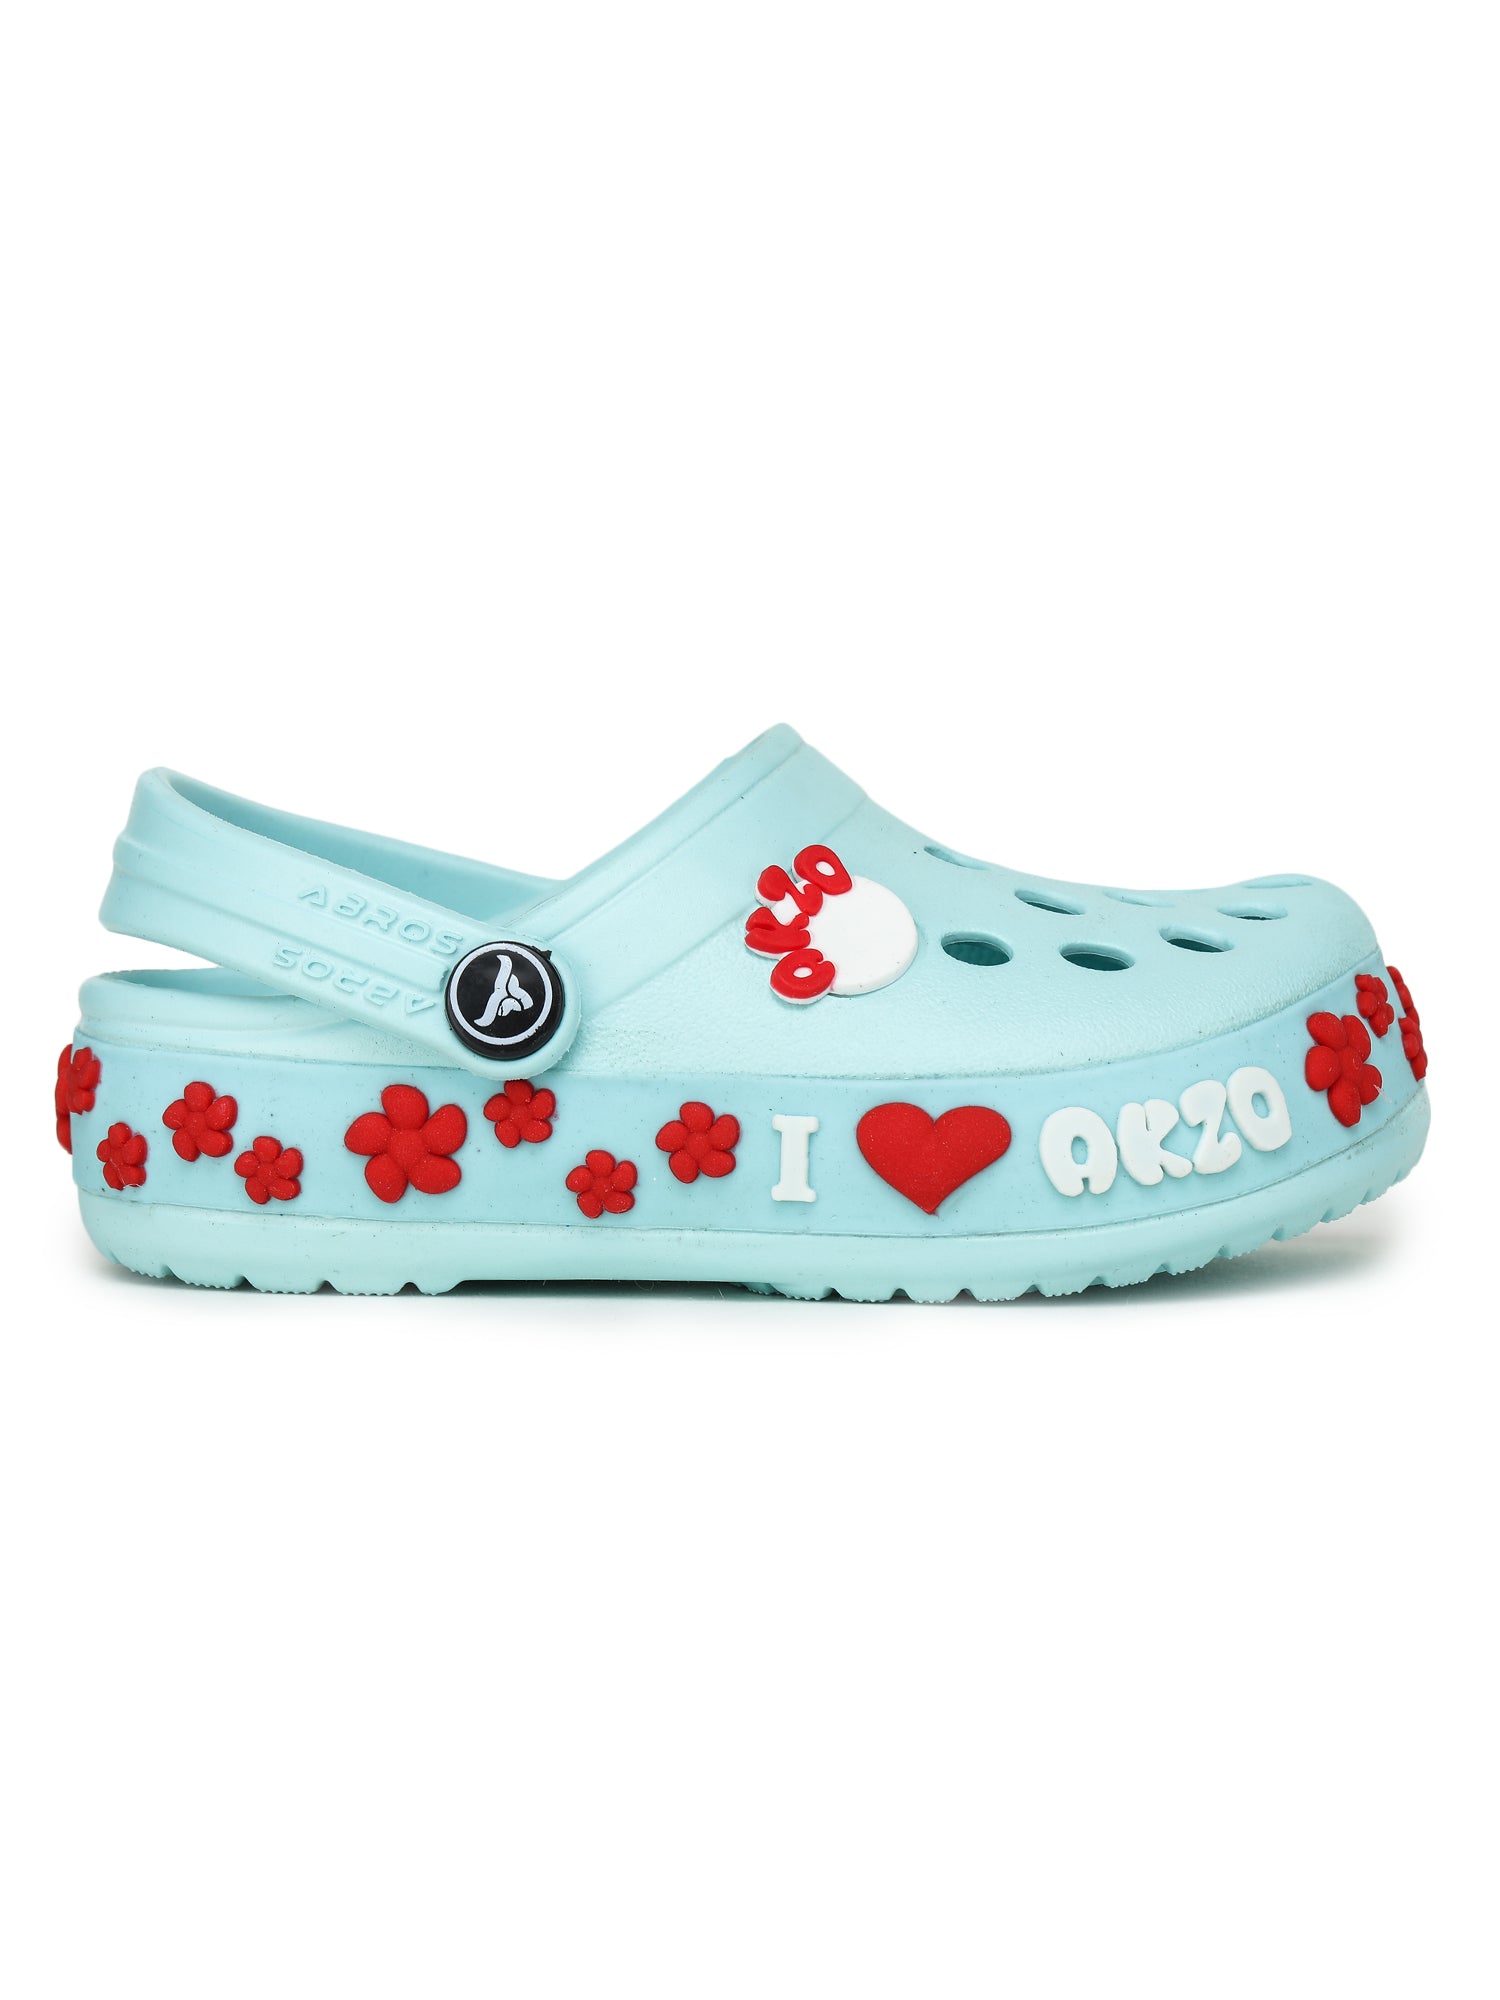 ZCK-0804 CLOGS FOR KIDS